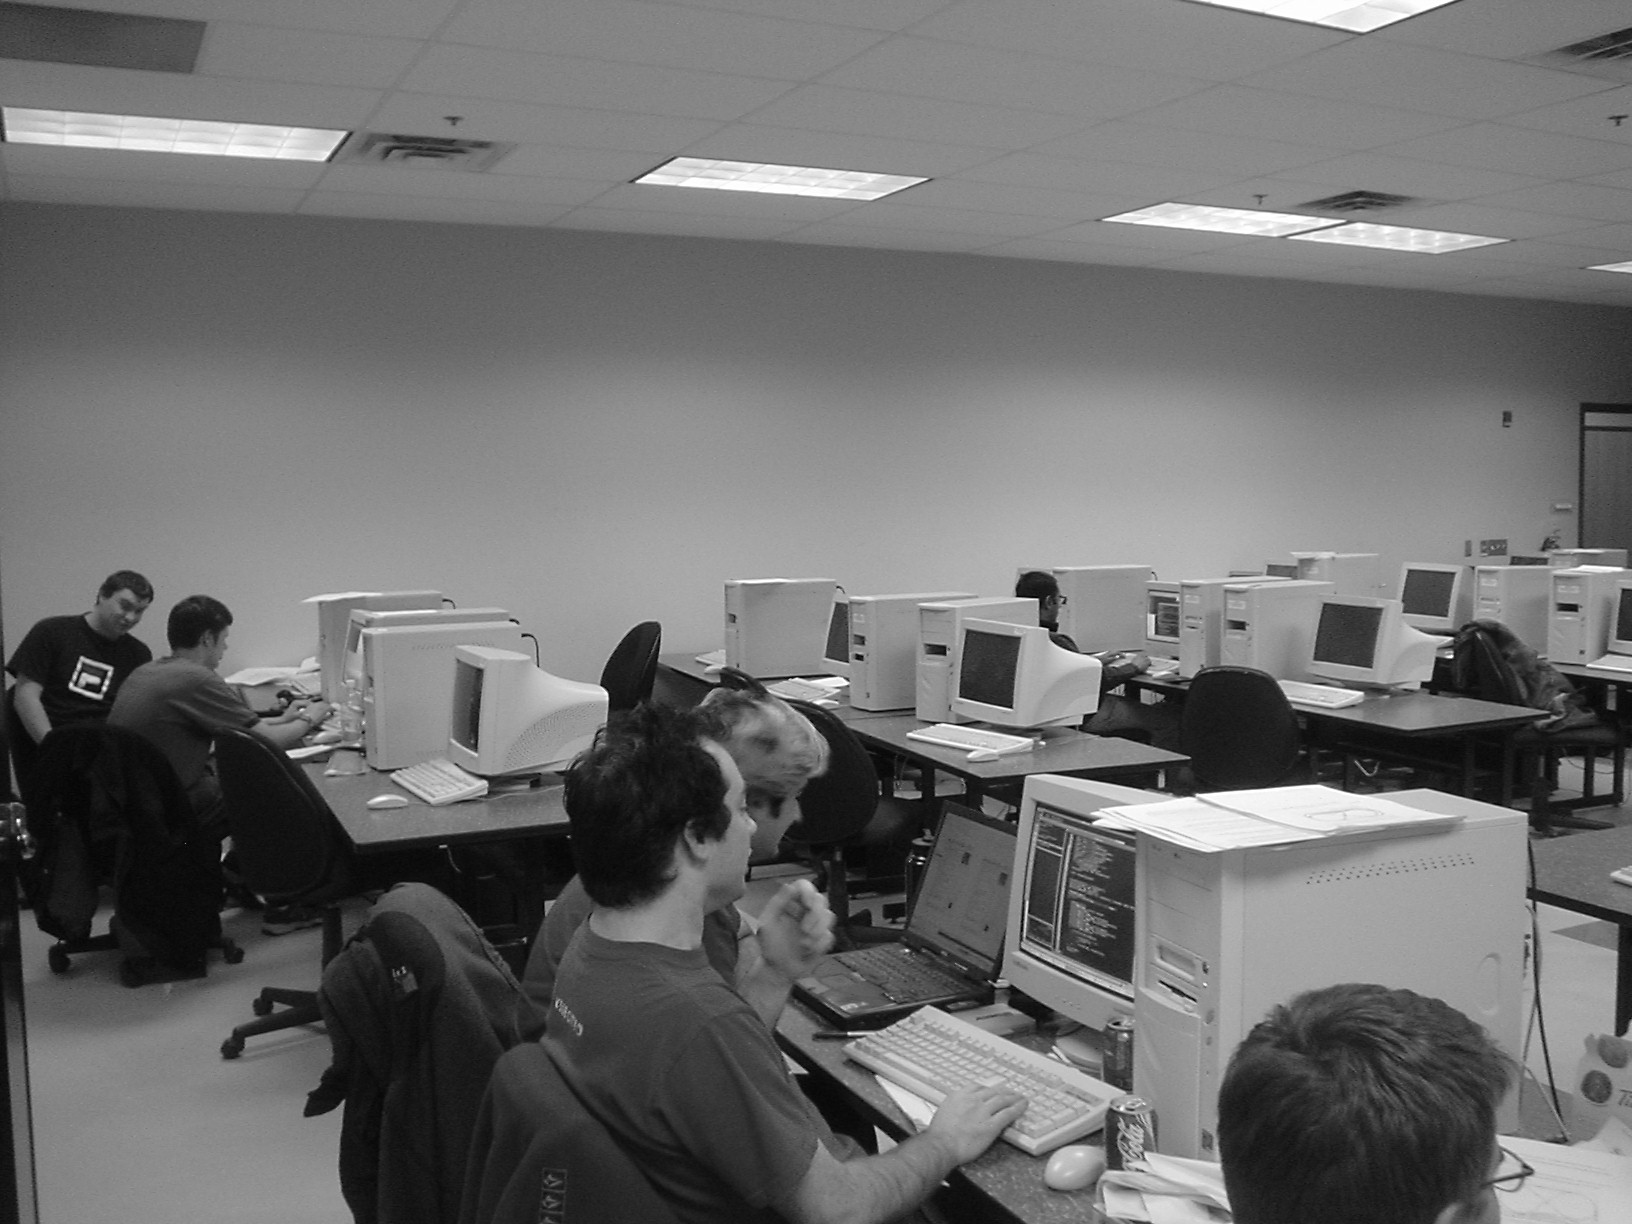 a computer lab with several people sitting at computers and typing on keyboards